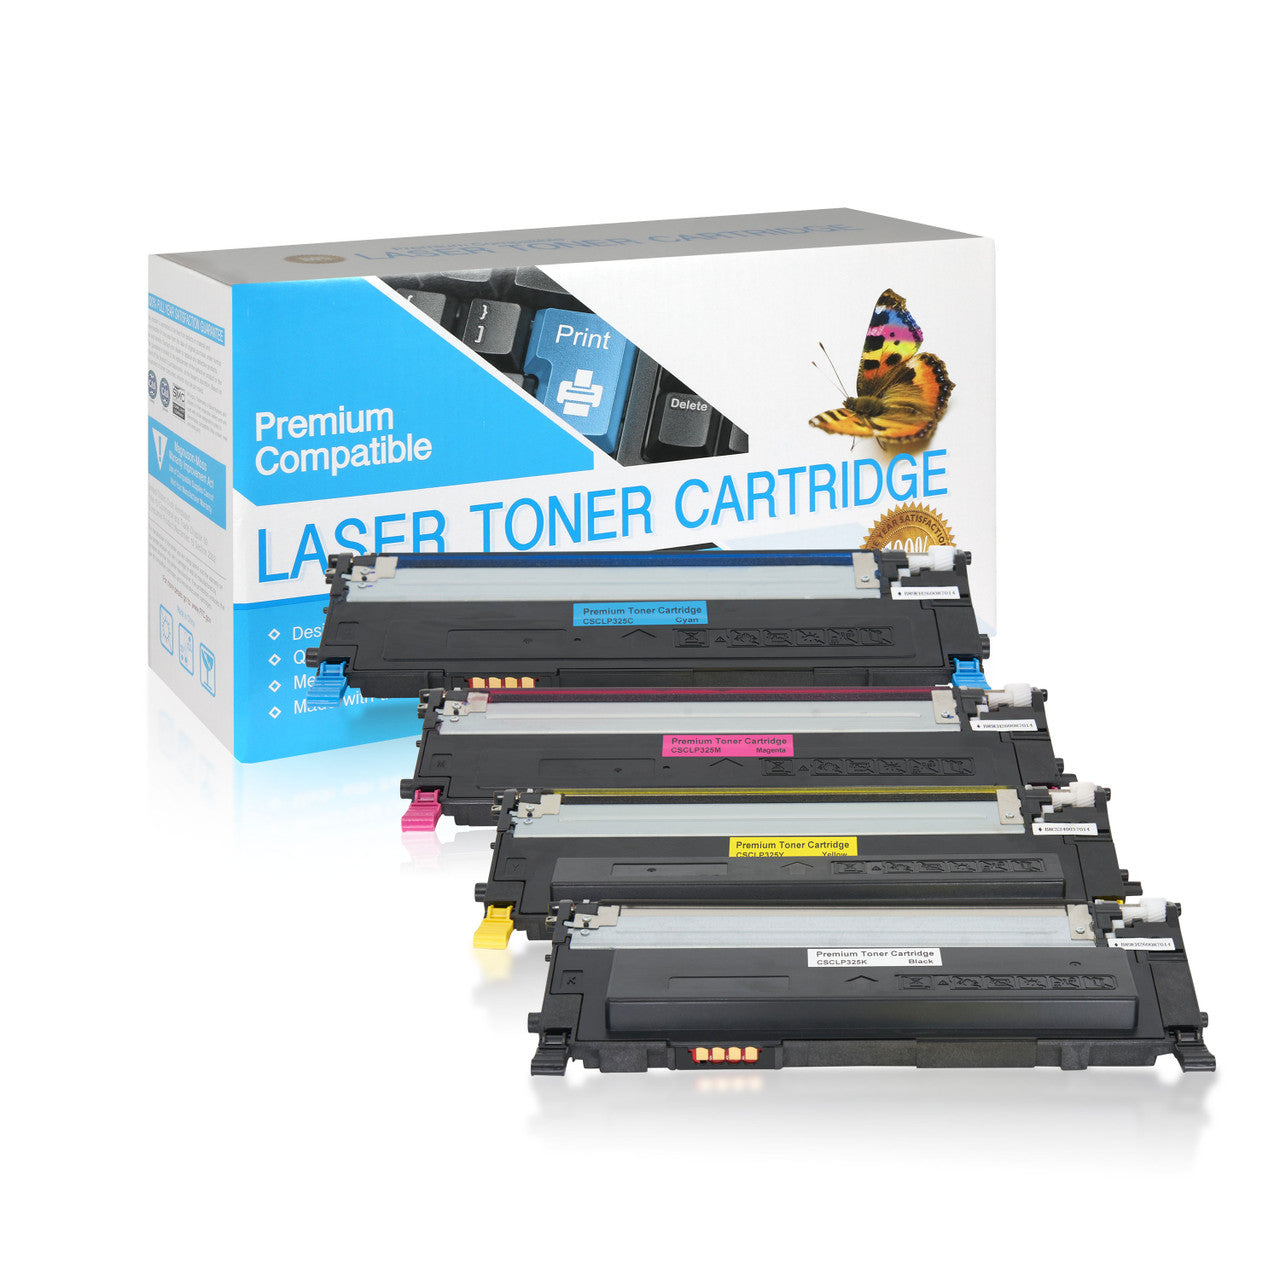 Compatible Samsung CLP-320 Toner Cartridge (All Colors) by SuppliesOutlet